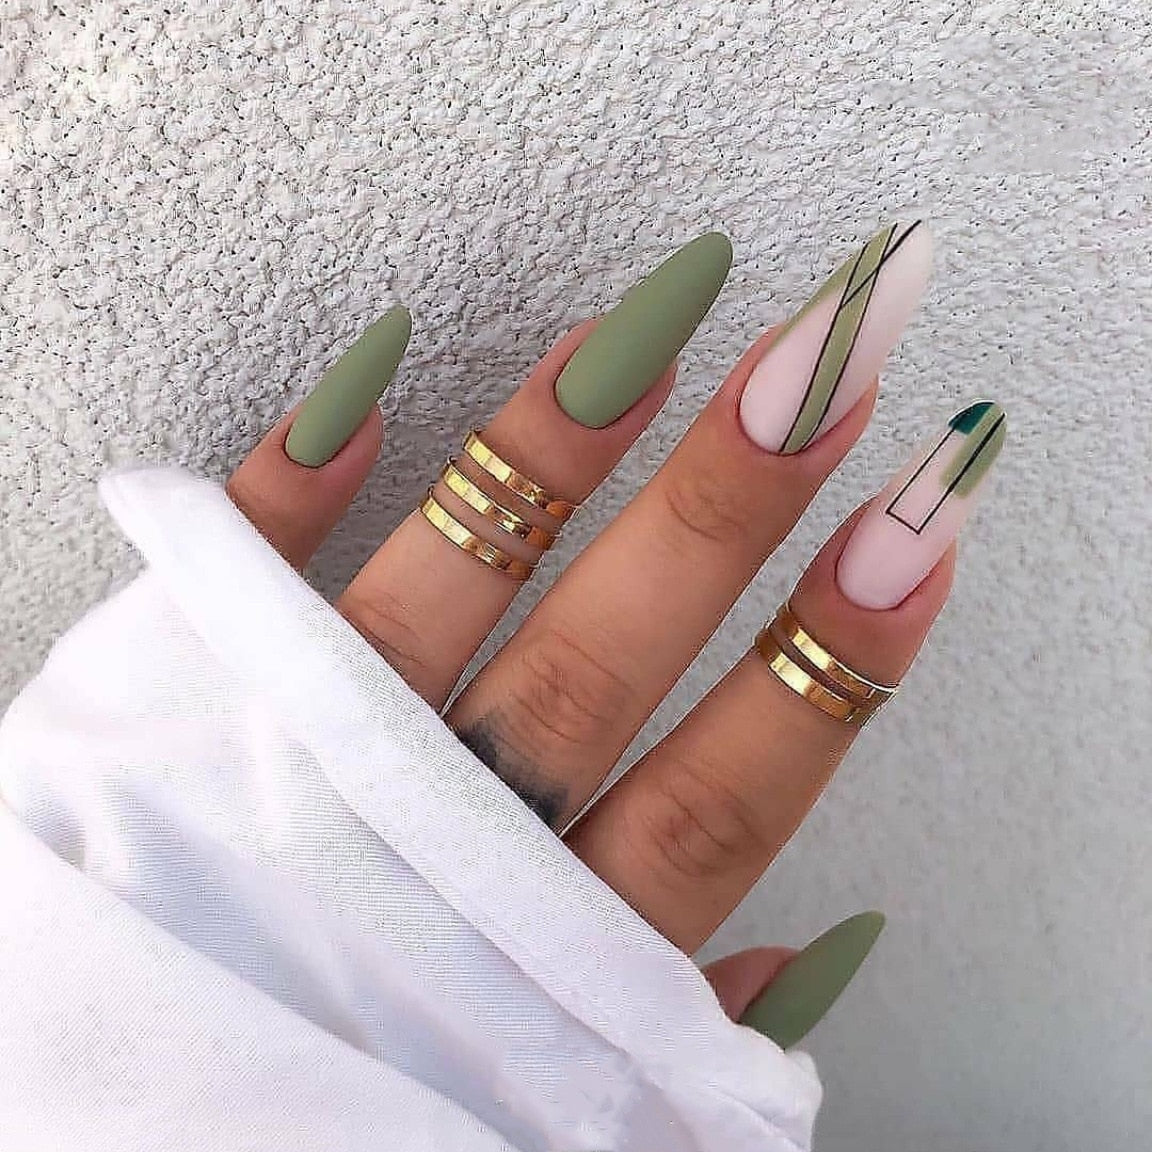 24pcs false nails matte Green Nails Patch with glue Removable Long Paragraph Fashion Manicure press on Nail tips Basso & Brooke